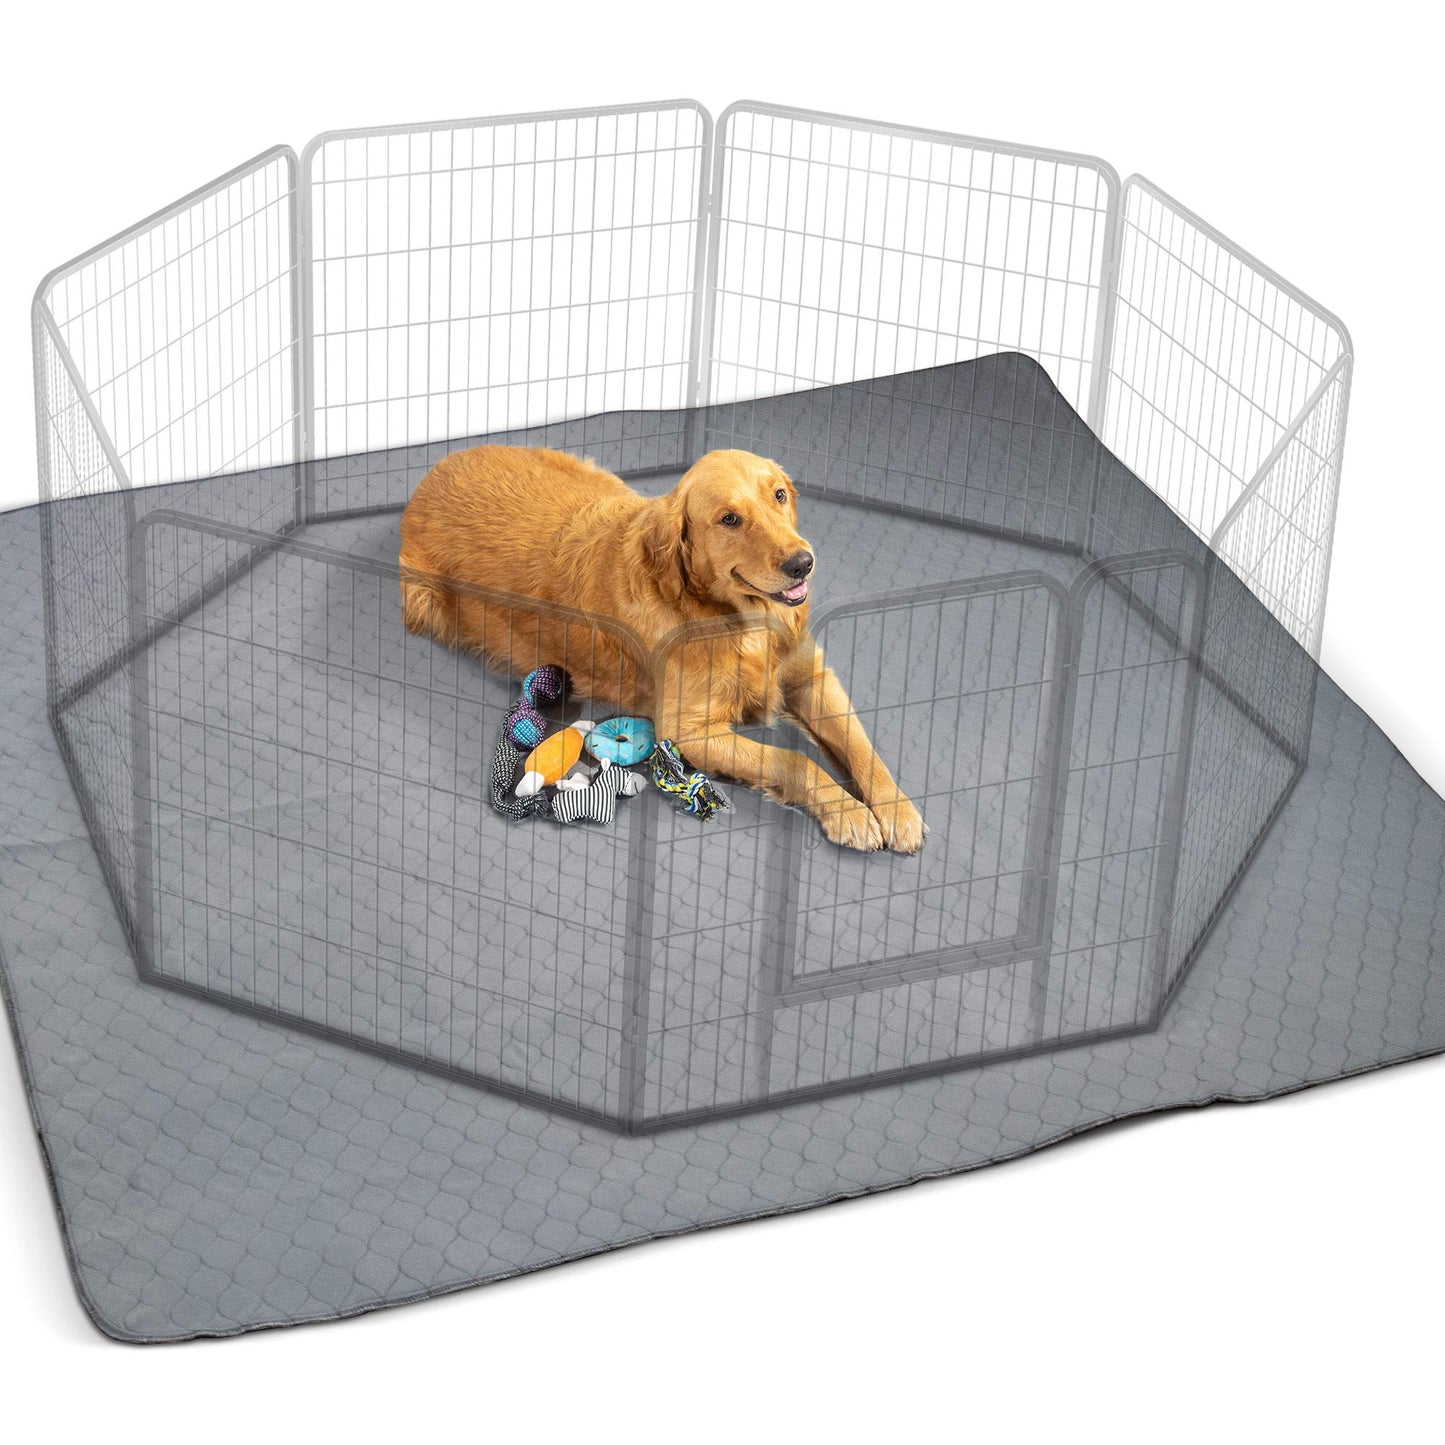 ZICOTO The Ultimate Easy to Clean XXL Puppy Whelping Pad 72"x72" - Our Washable Super Absorption Pee Pad is Perfect for Your Whelping Box Or Exercise Playpen- The Durable Non Slip Floor Mat for Dogs